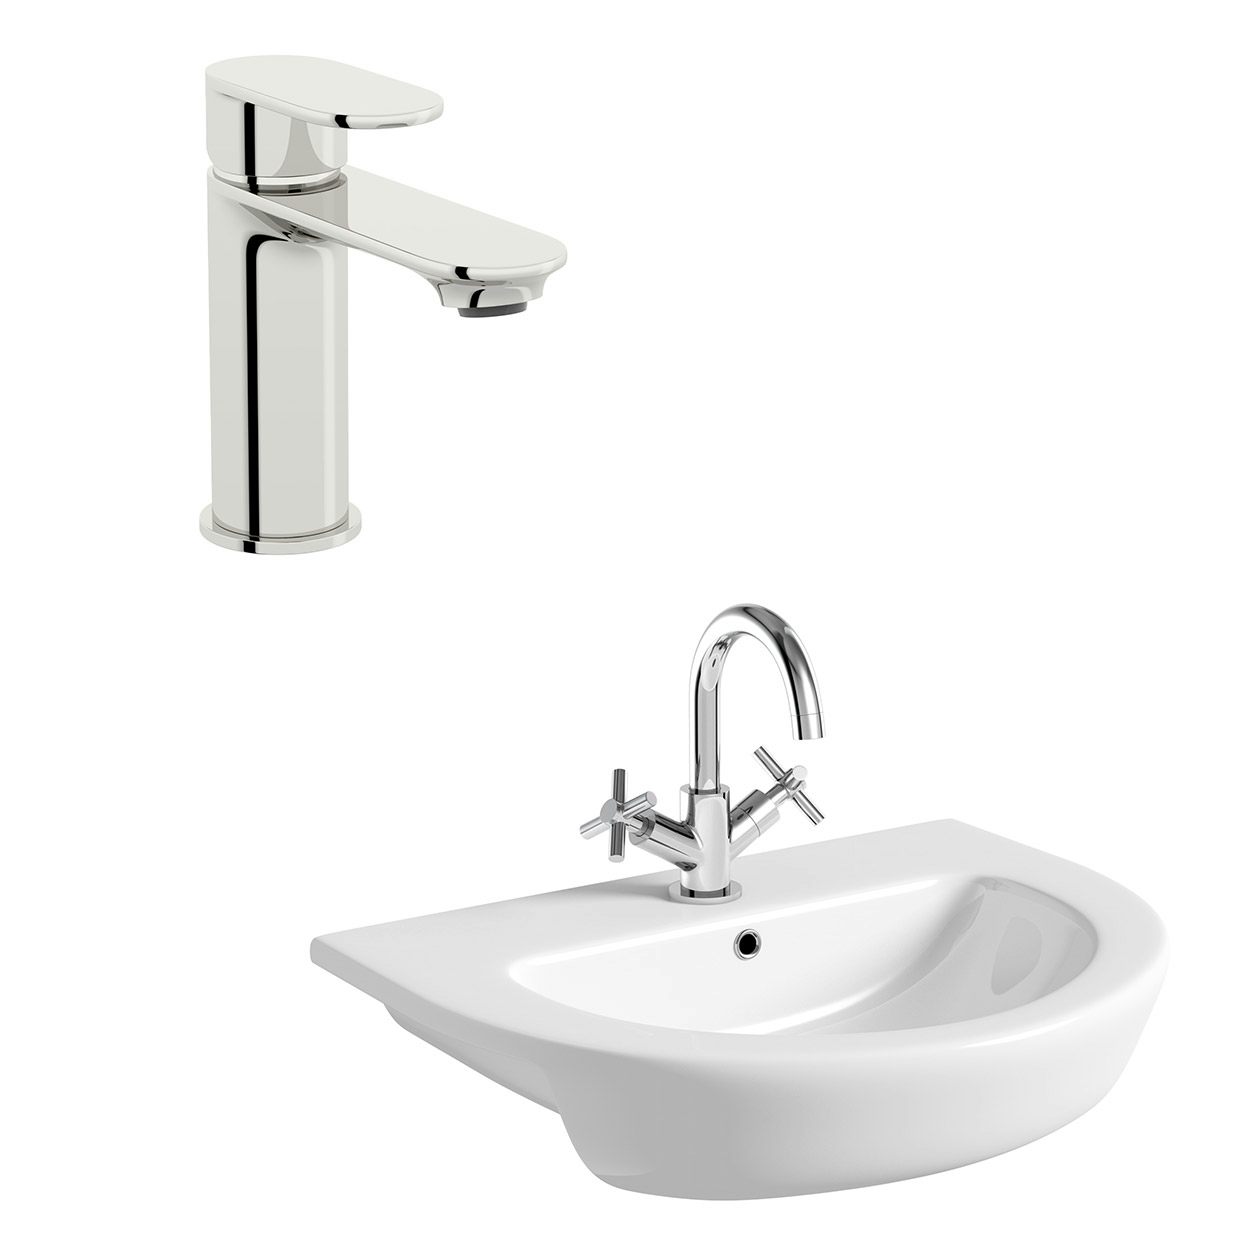 Mode Tate 1 tap hole semi recessed countertop basin 550mm with basin mixer tap